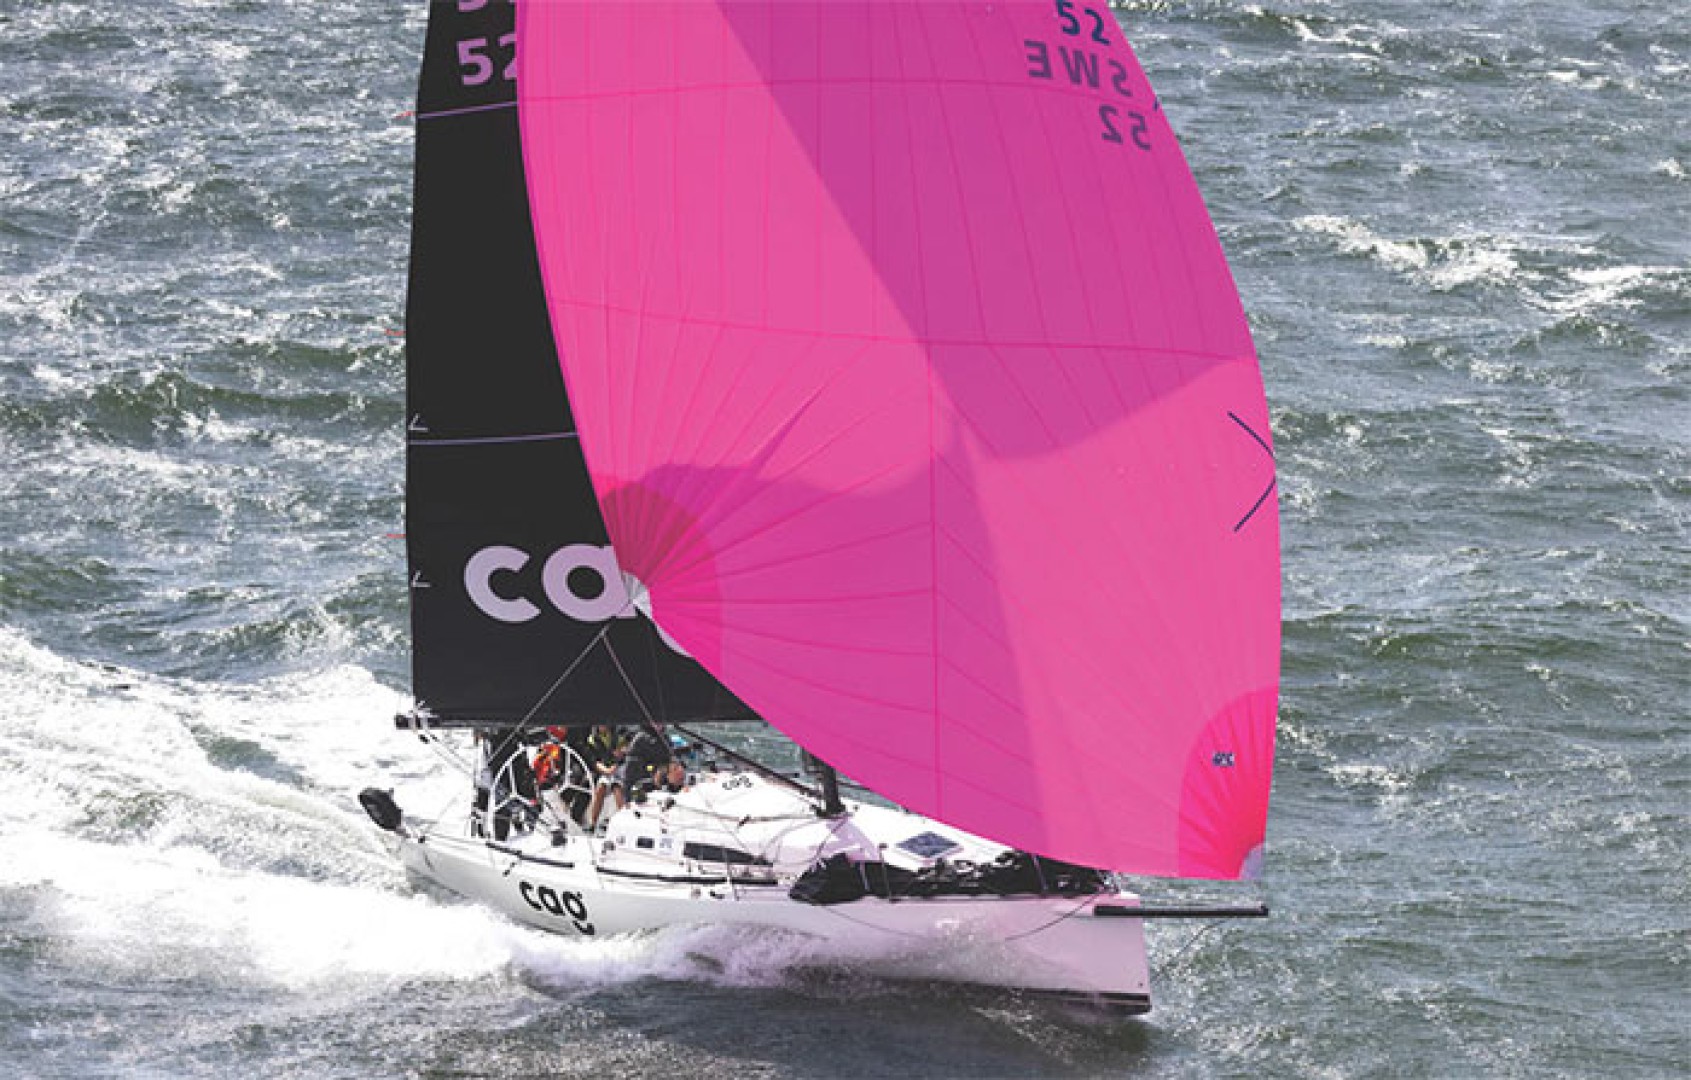 There are a few key differences between Asymmetric spinnakers designed for offshore racing and those that are optimised for windwardleeward races inshore.